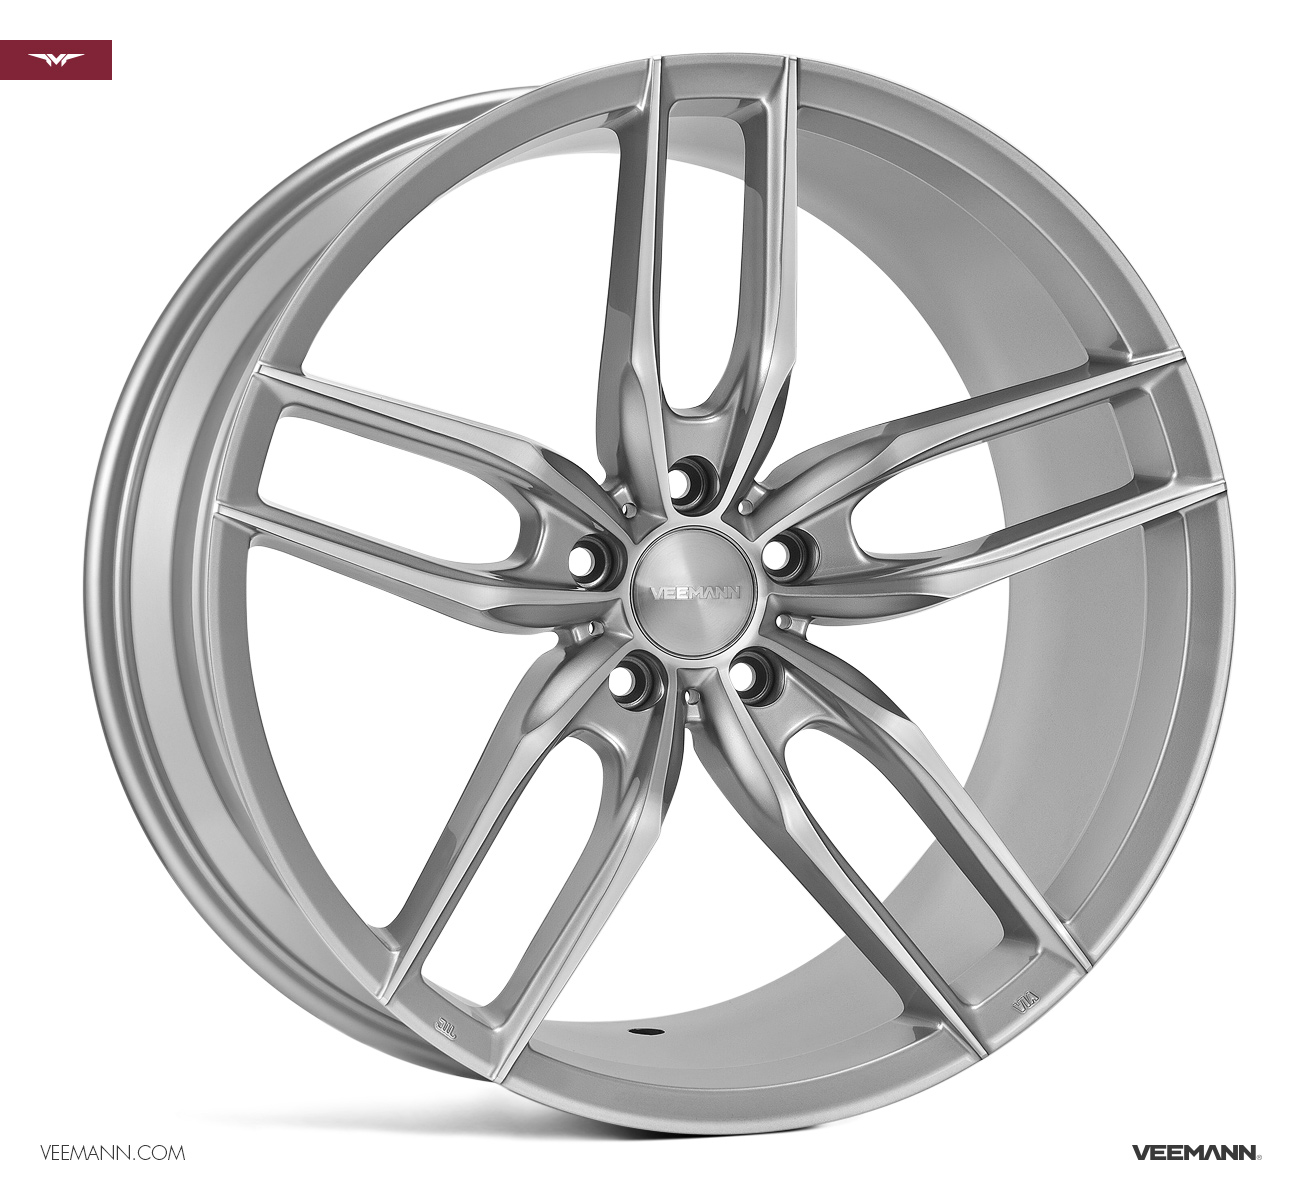 NEW 19  VEEMANN V FS28 ALLOY WHEELS IN SILVER POL WITH WIDER 9 5  REARS 5x112